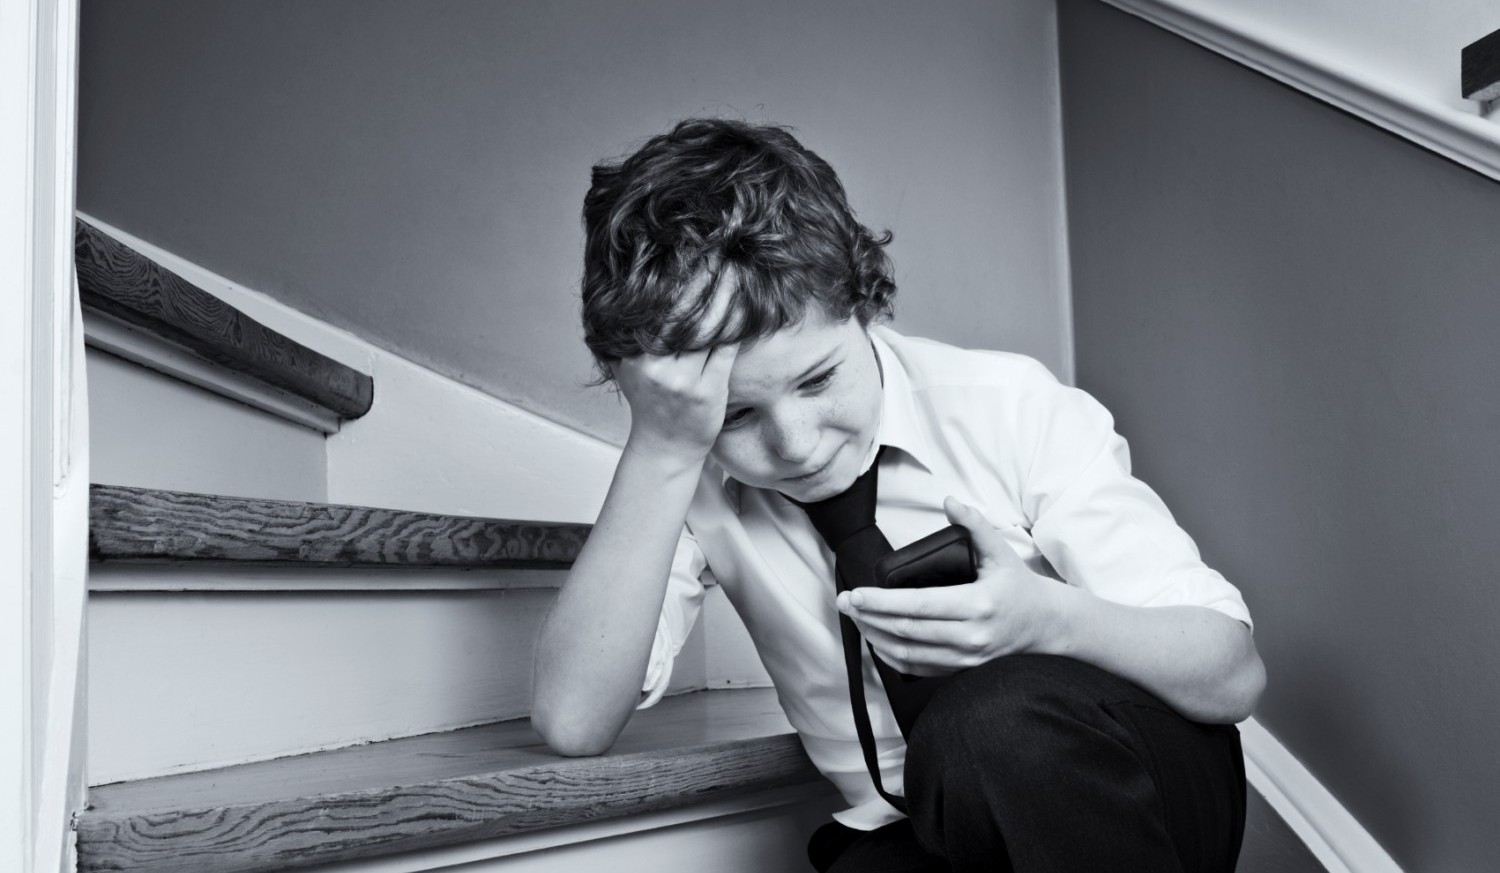 Helping Your Child Deal with Bullies: 9 Posts for Parents